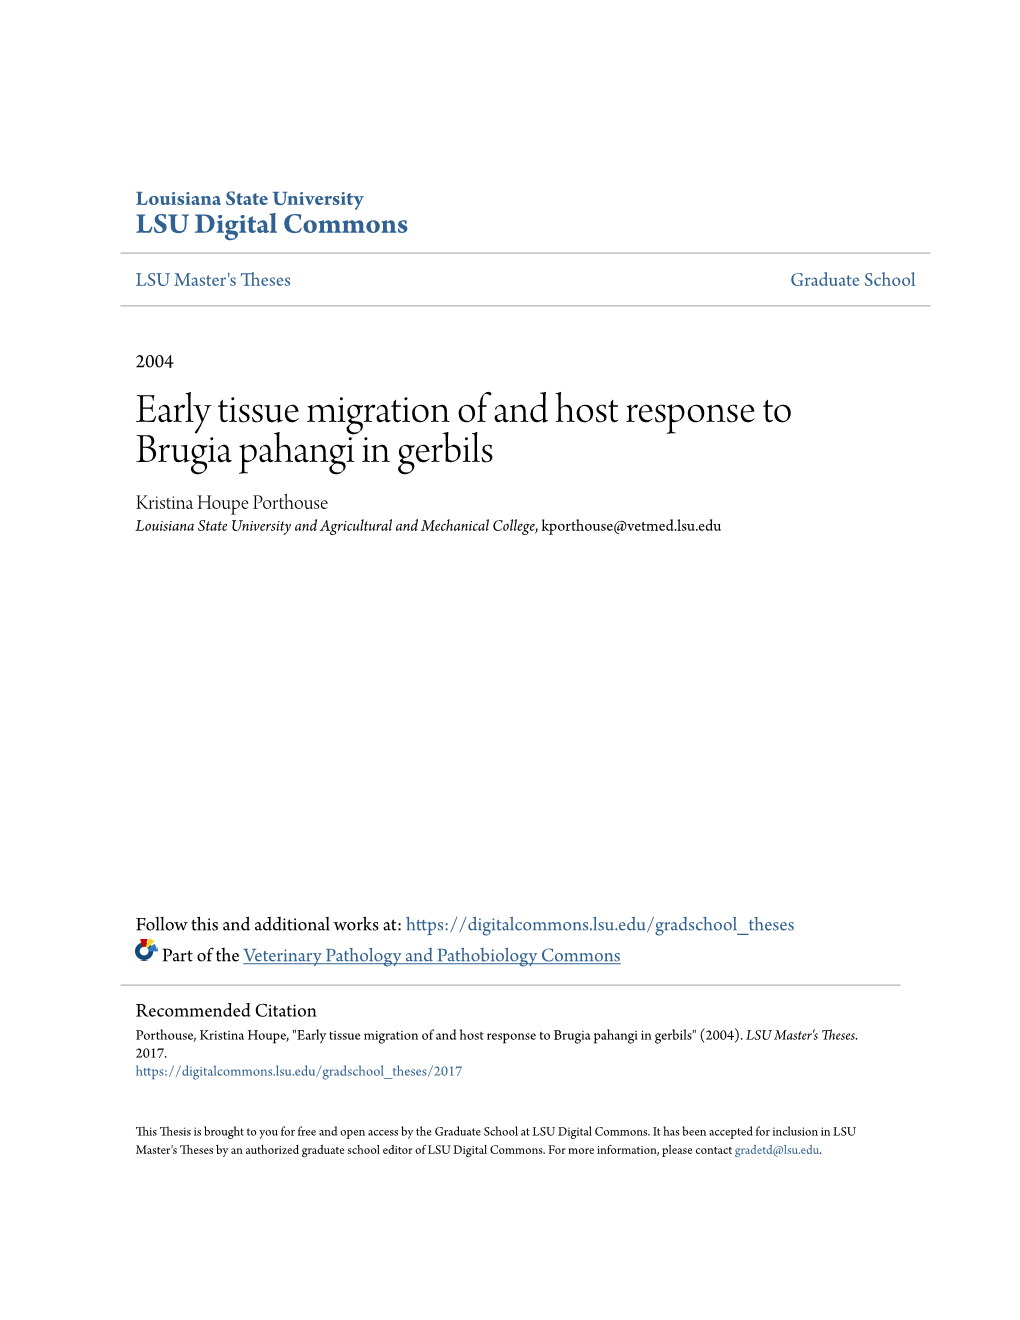 Early Tissue Migration of and Host Response to Brugia Pahangi in Gerbils